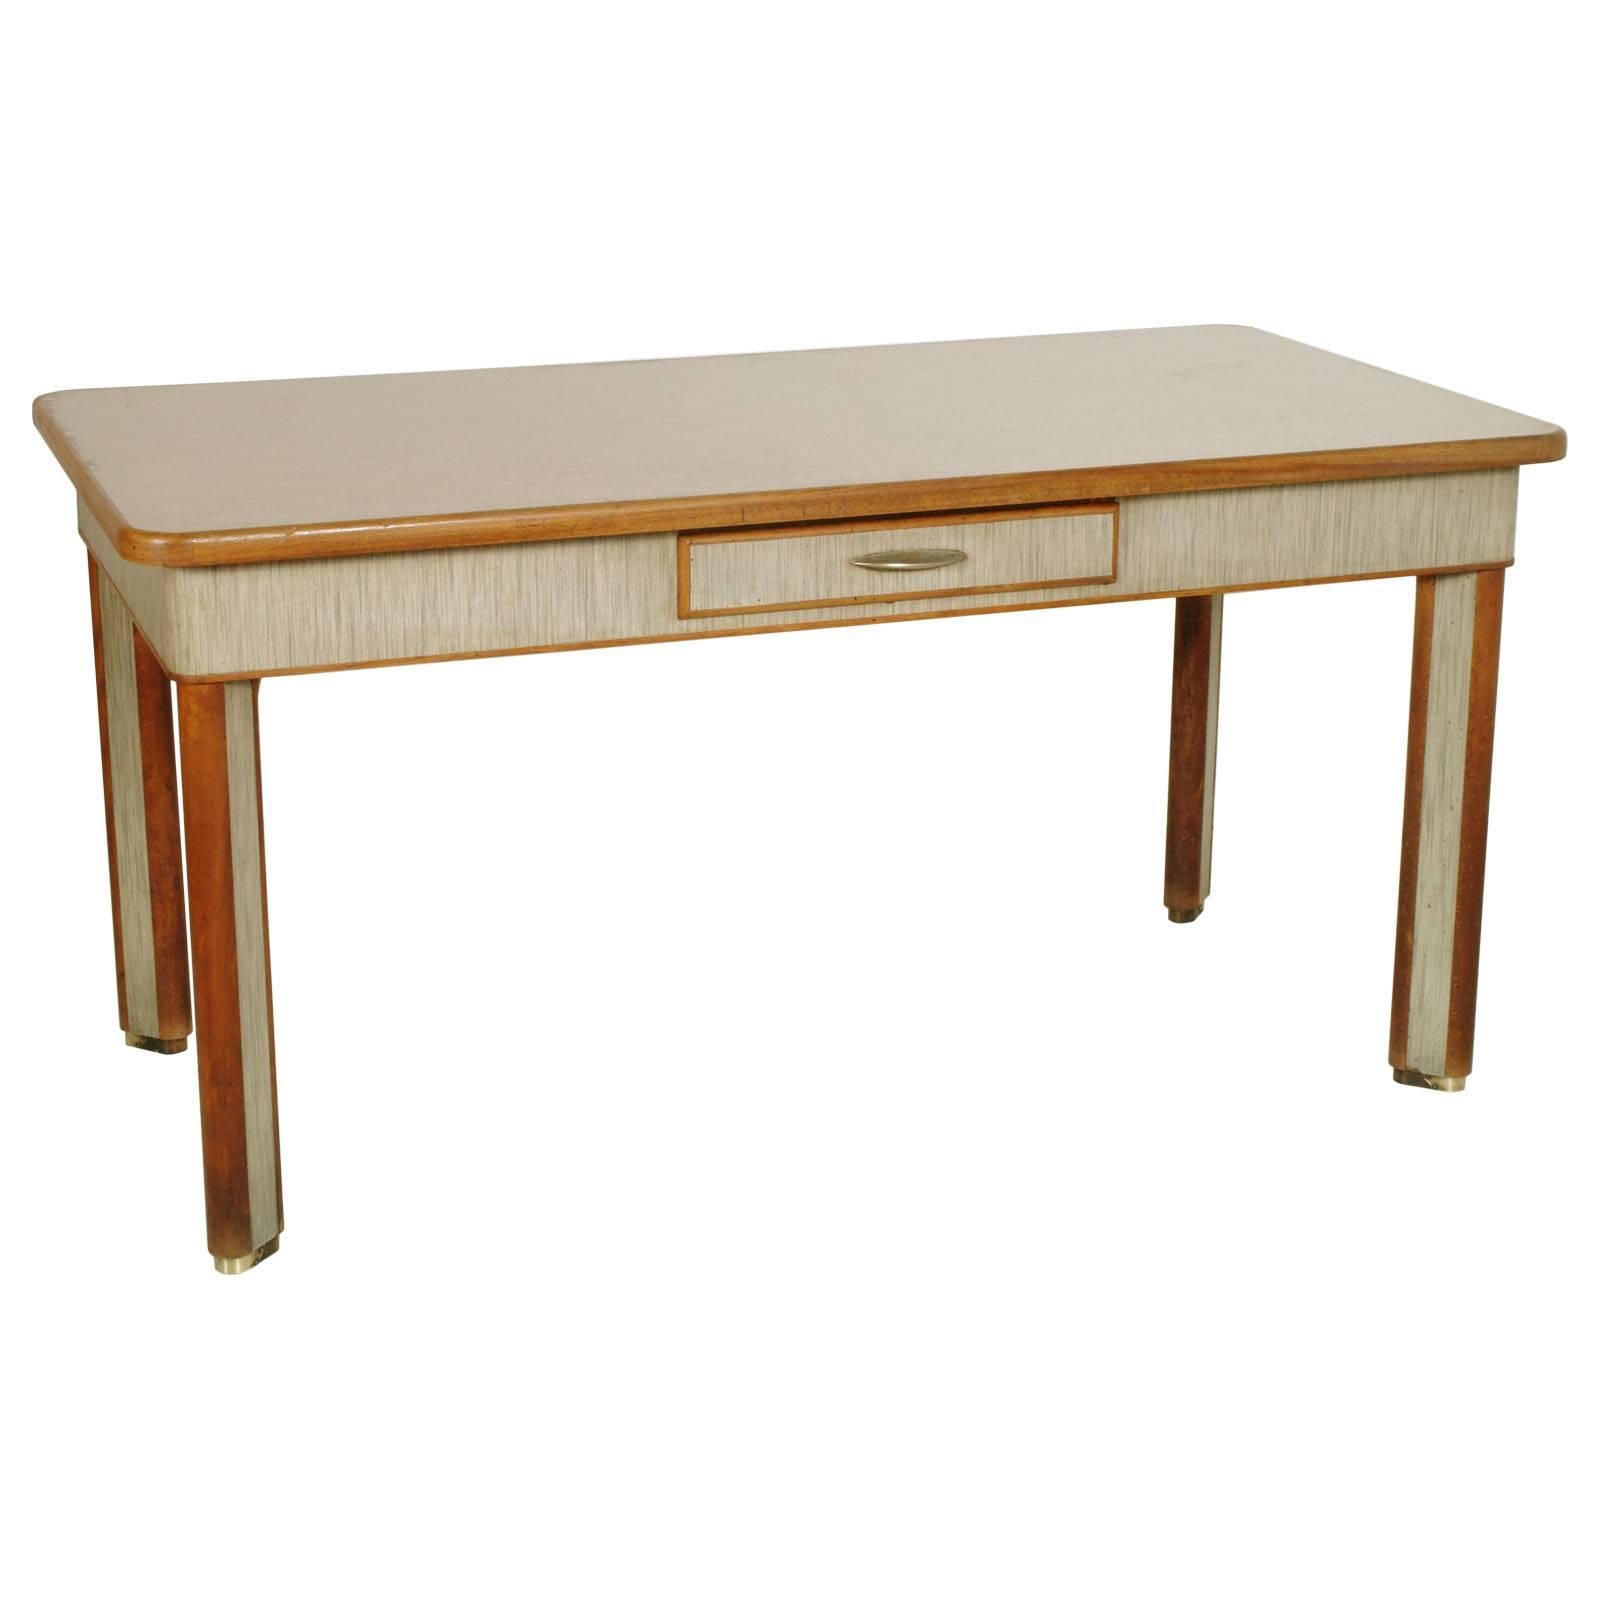 1940s Art Deco Dining Table with Drawer, Solid Beech, Top in Formica, Brass Feet